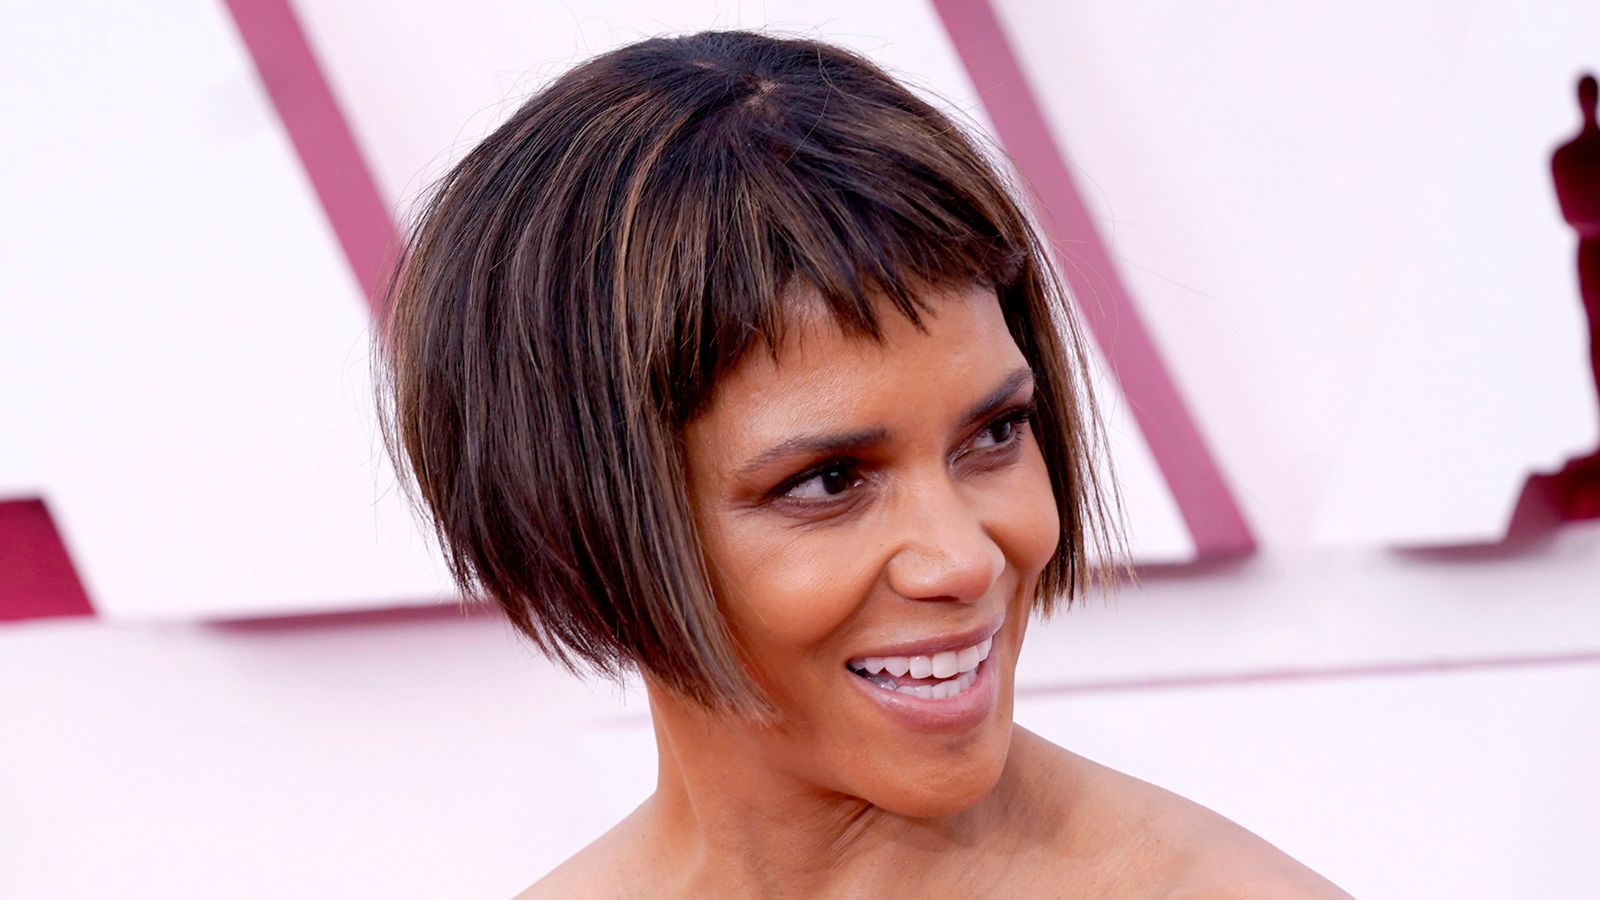 65 short hairstyles for women over 50 to inspire a fresh cut | Woman & Home